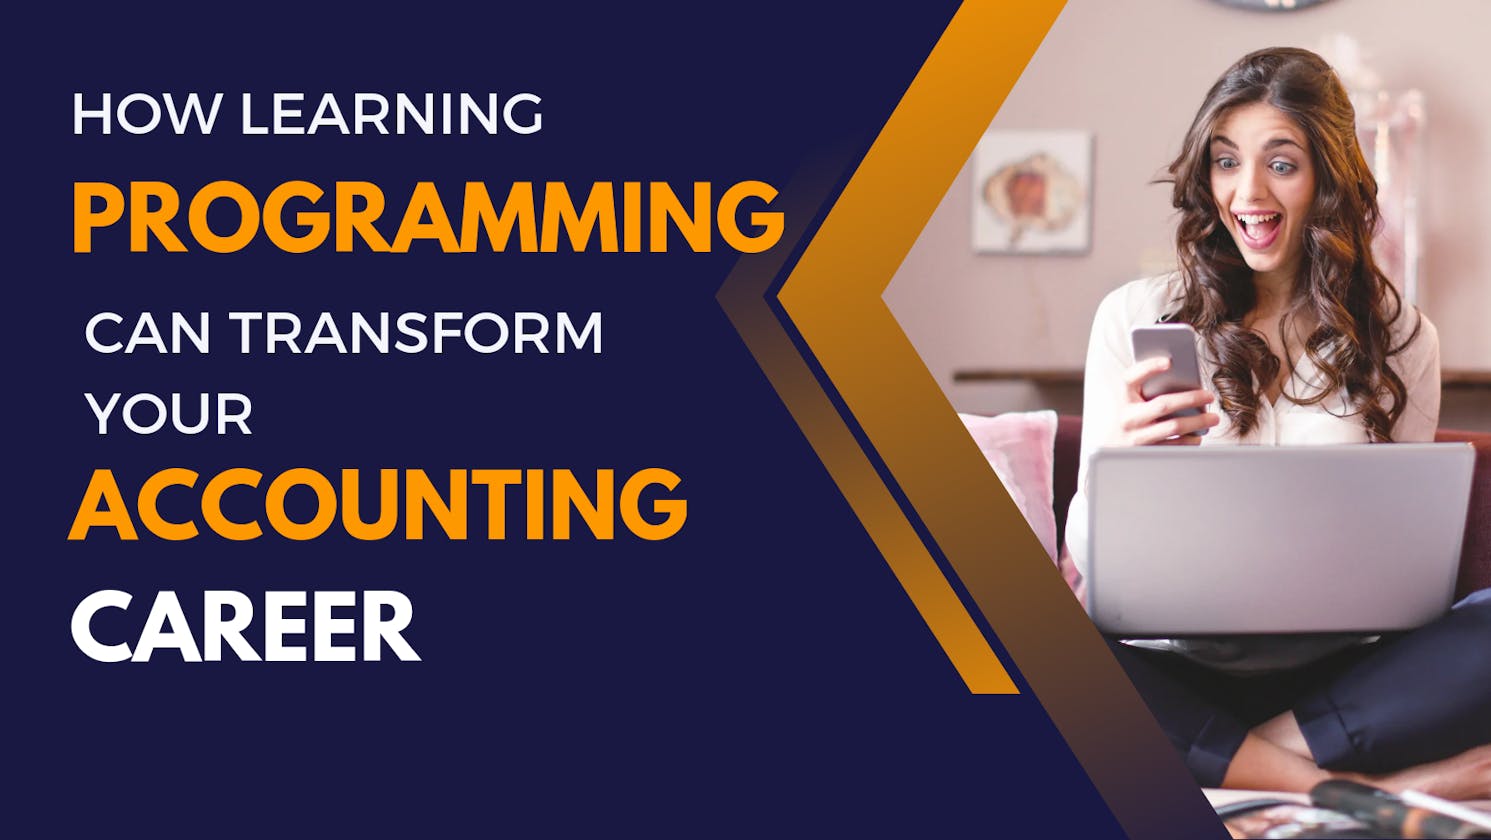 How Learning Programming Can Transform Your Accounting Career